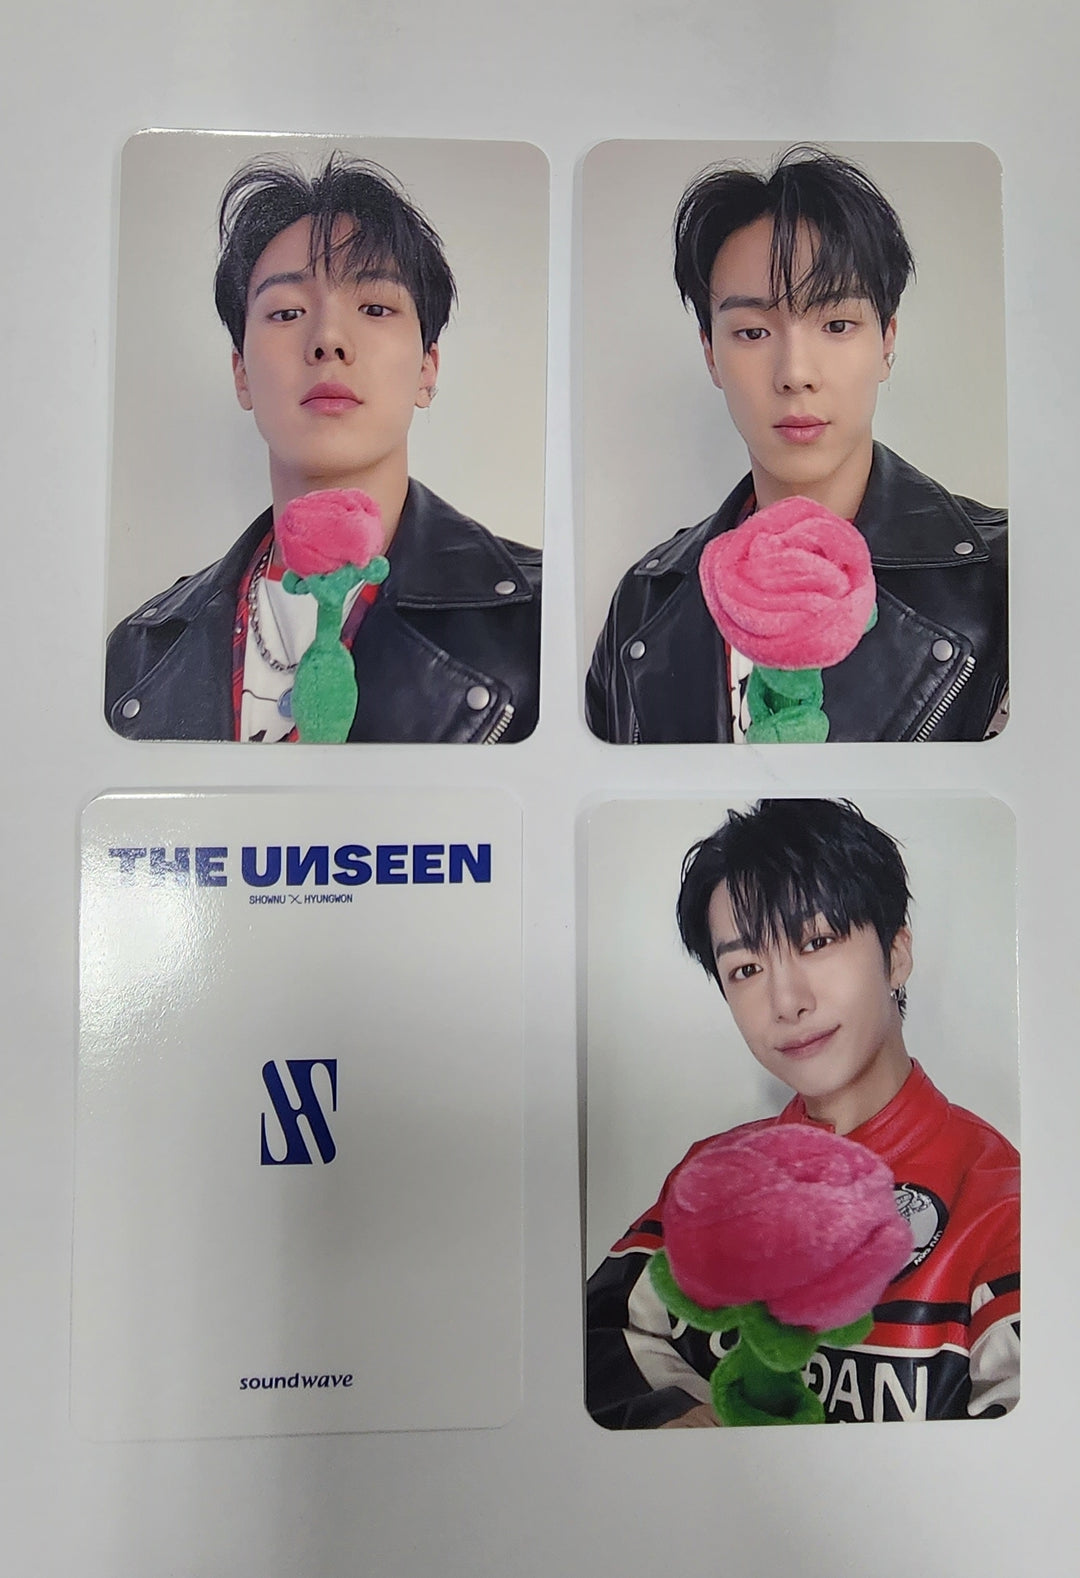 Shownu X Hyungwon "The Unseen" - Soundwave Pre-Order Benefit Photocard